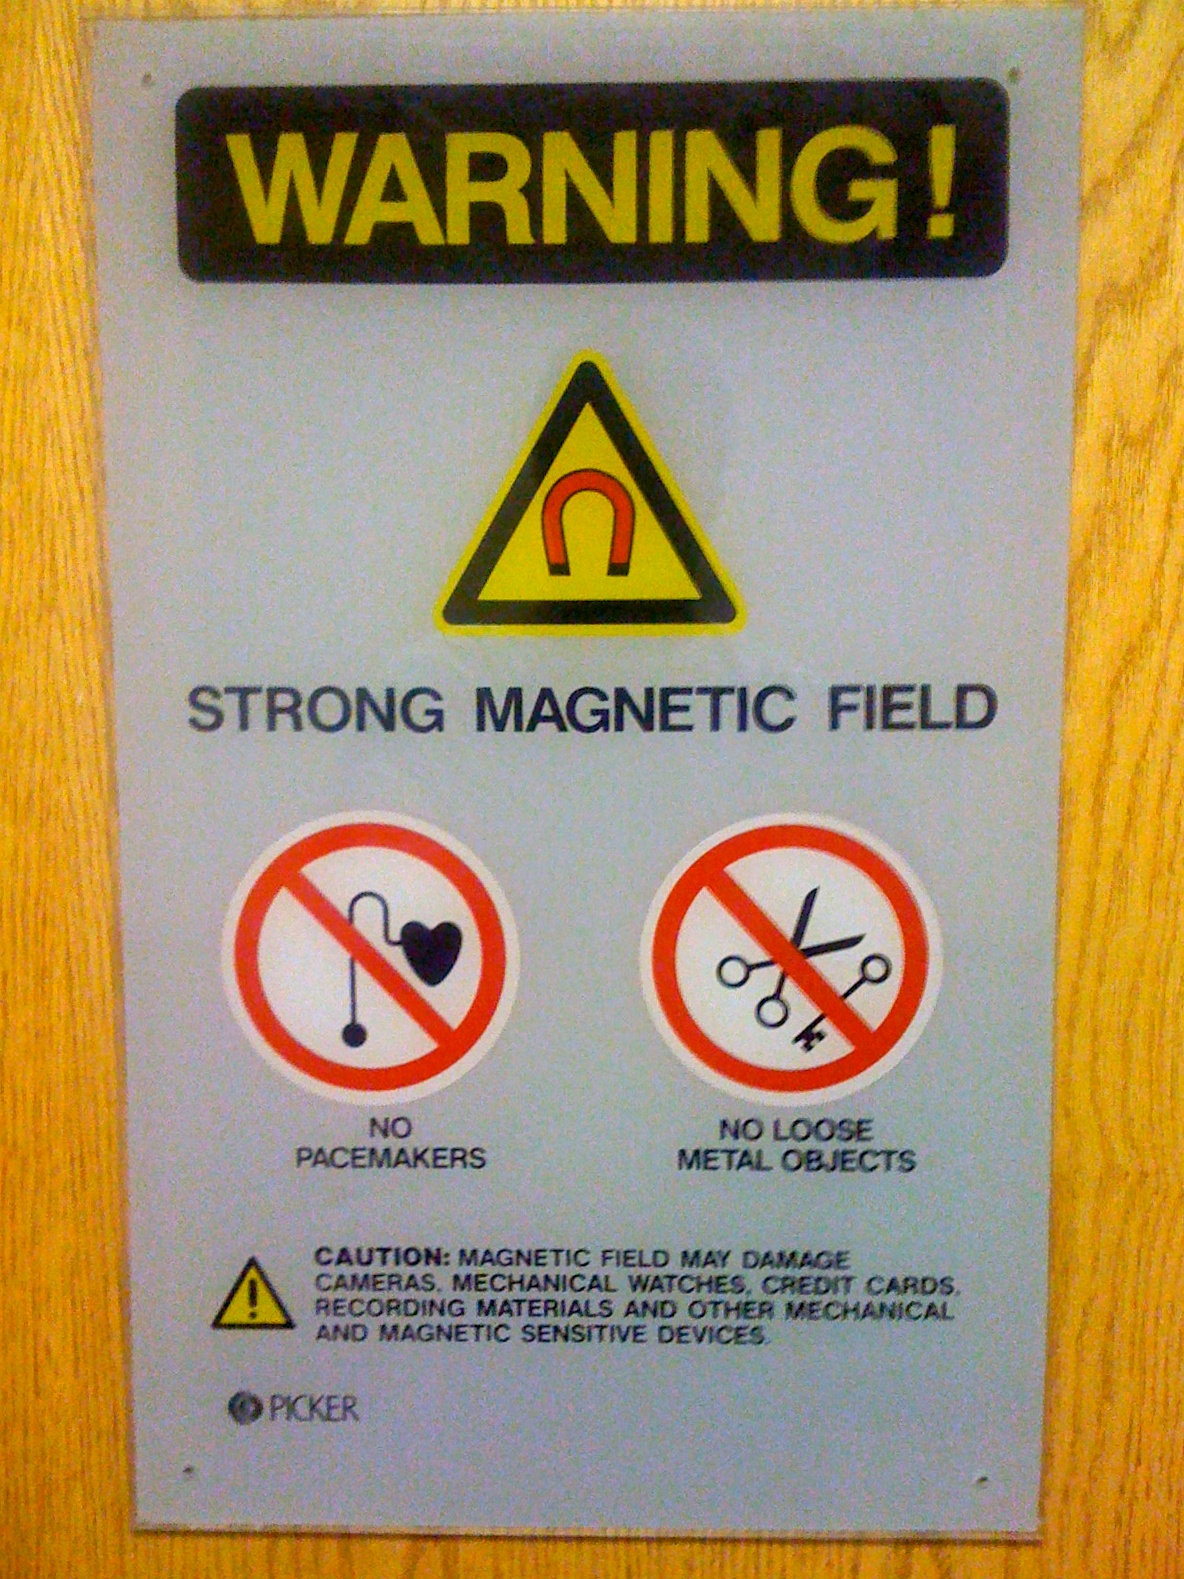 Day 85 - Strong Magnetic Field